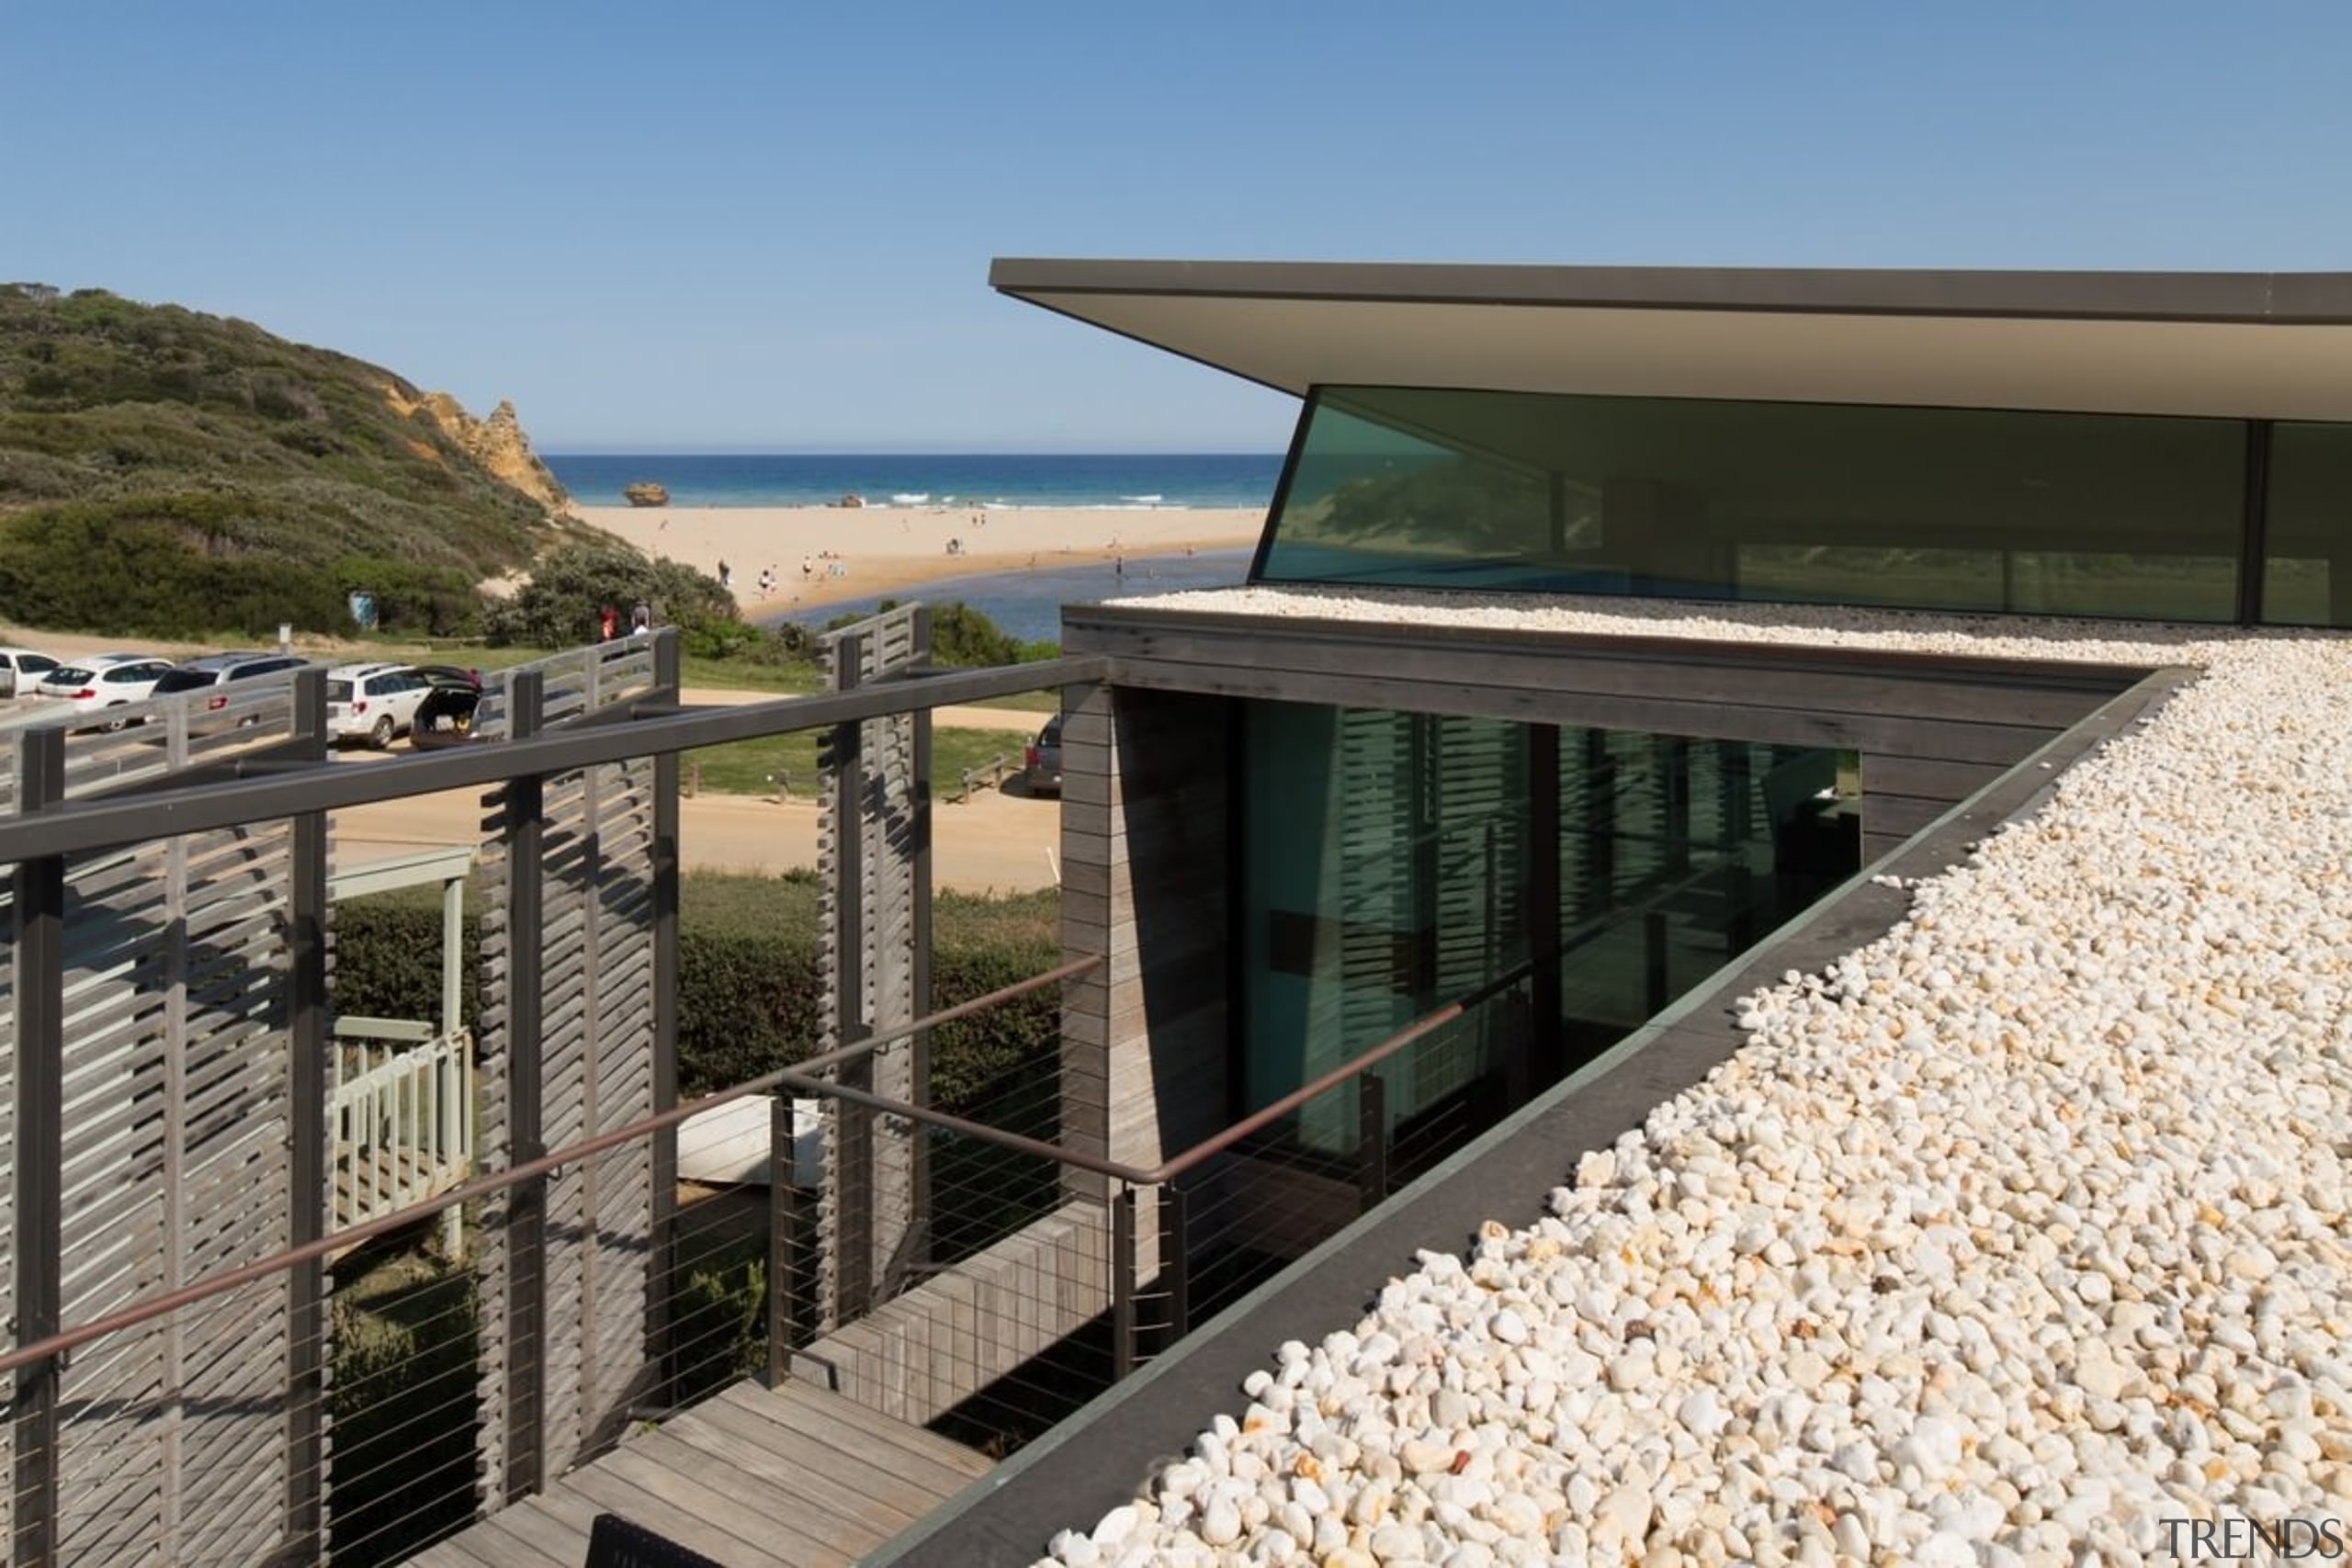 The roof echoes the nearby beach. The house architecture, handrail, house, property, real estate, walkway, black